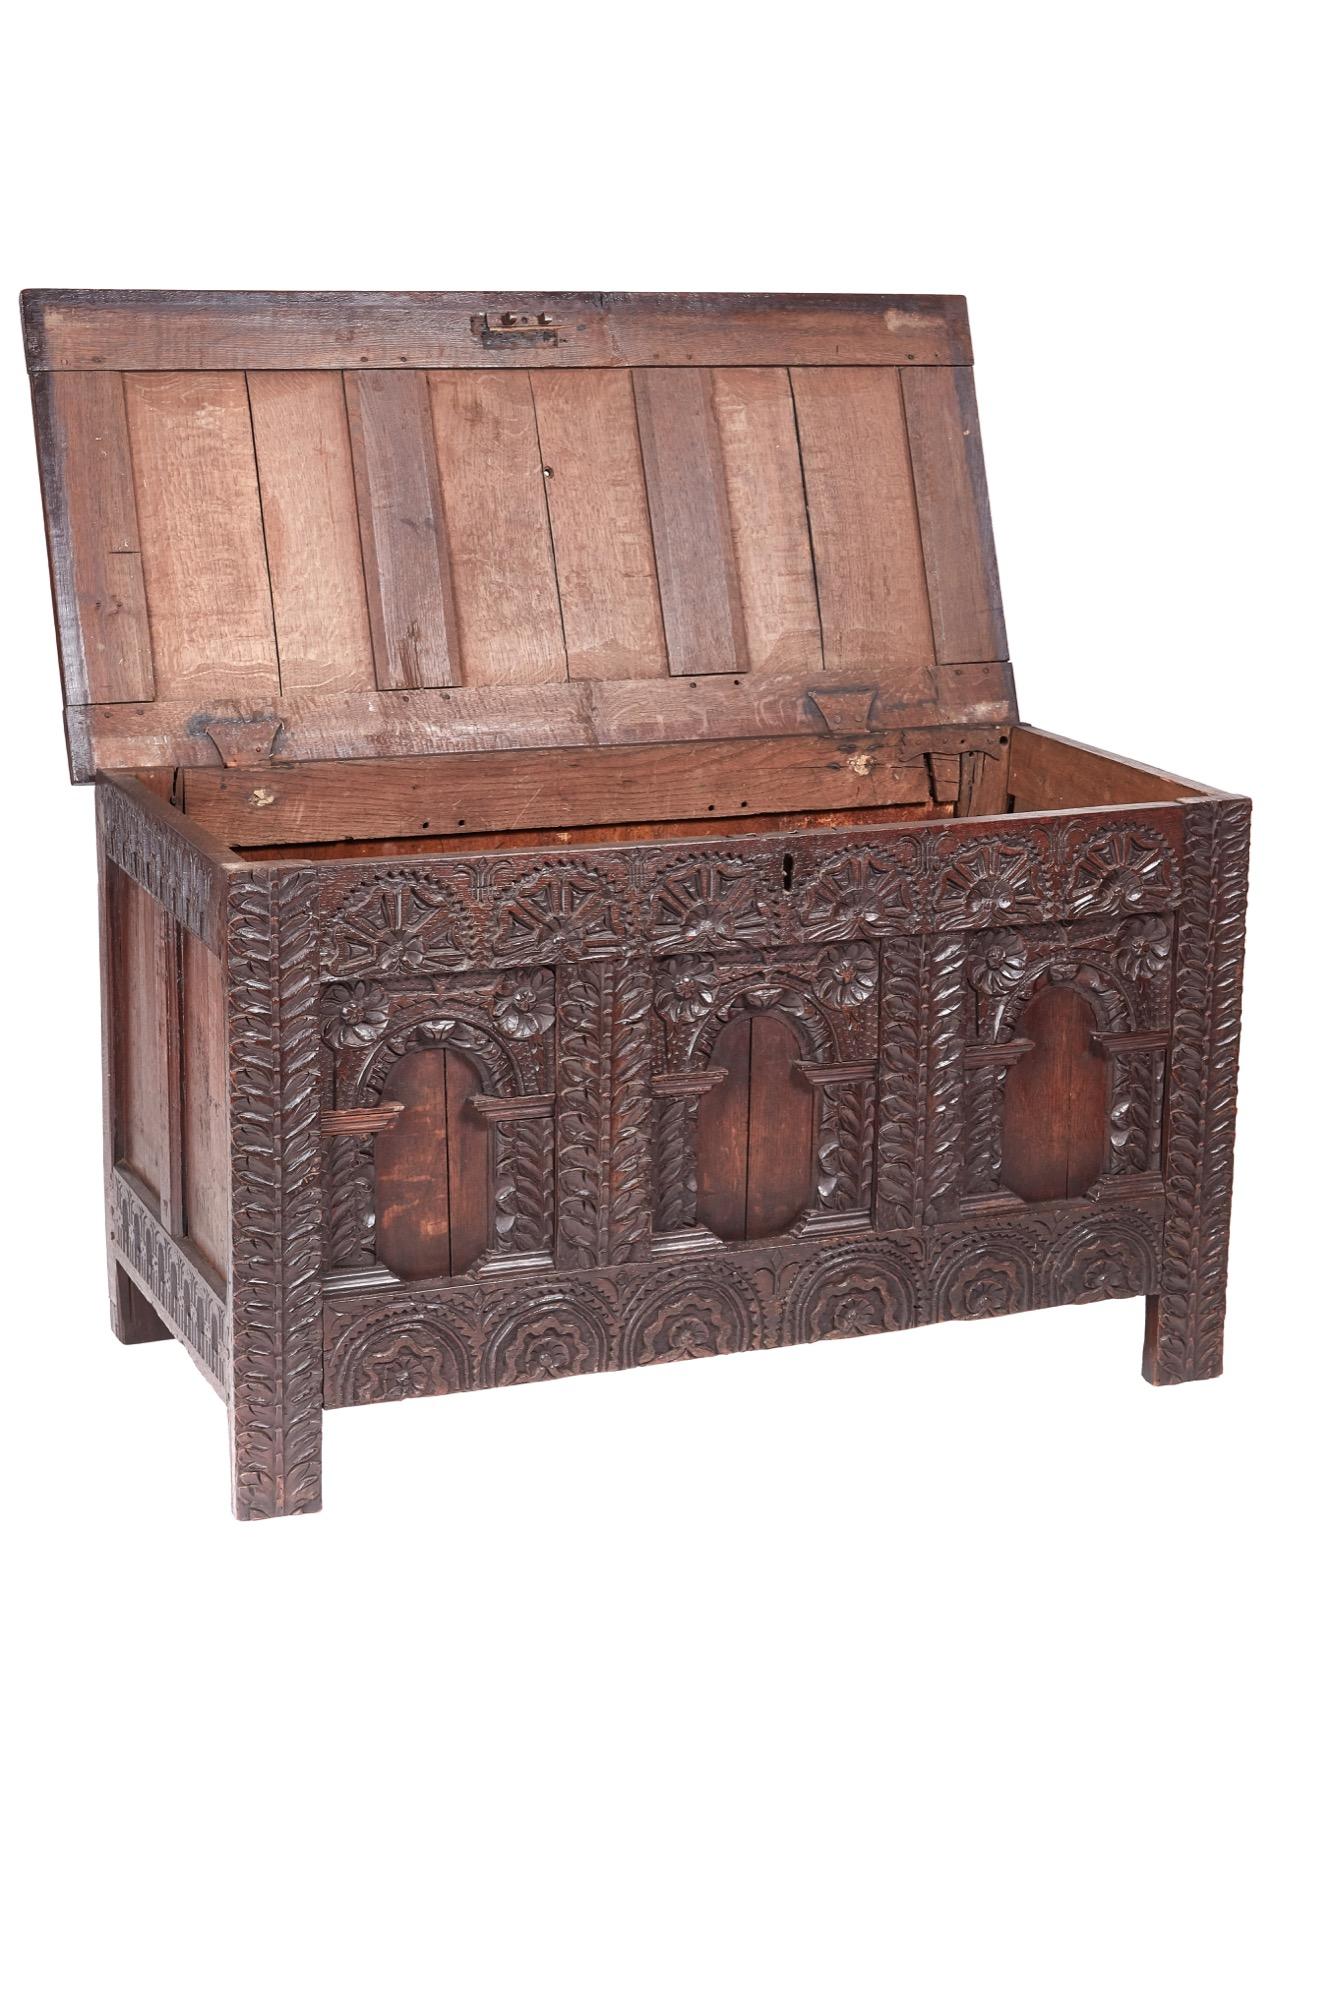 This is a fantastic 18th century antique carved oak paneled coffer with three panels to the top, intricately carved and beautifully designed frieze and panels to the front as well as paneled sides. It stands on stile feet.

In superior original